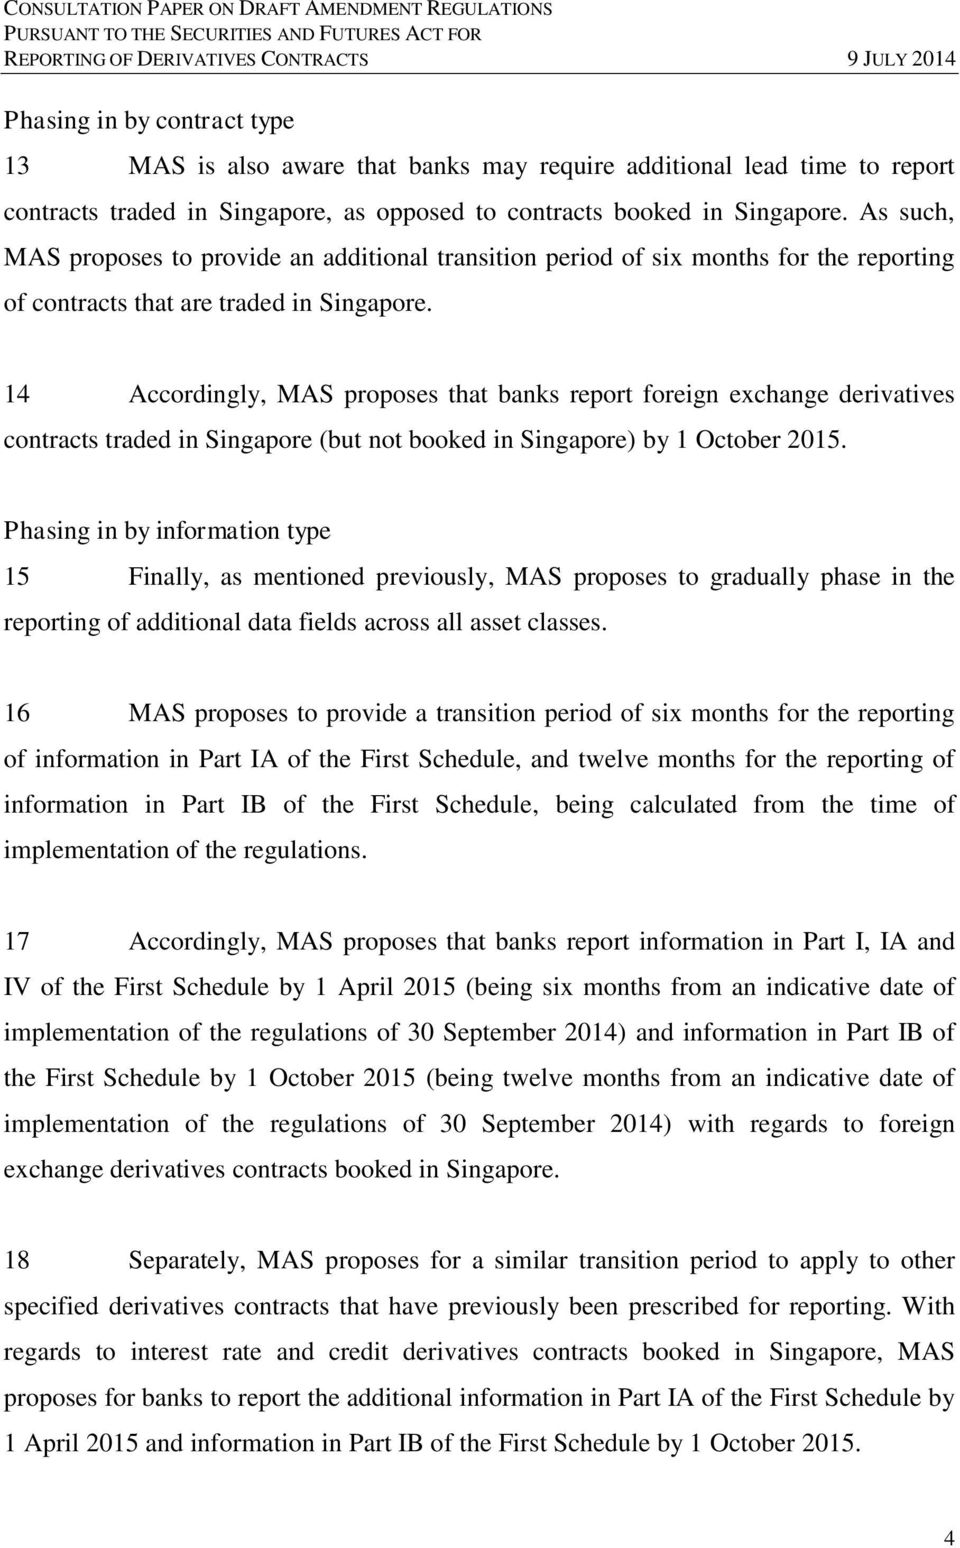 14 Accordingly, MAS proposes that banks report foreign exchange derivatives contracts traded in Singapore (but not booked in Singapore) by 1 October 2015.